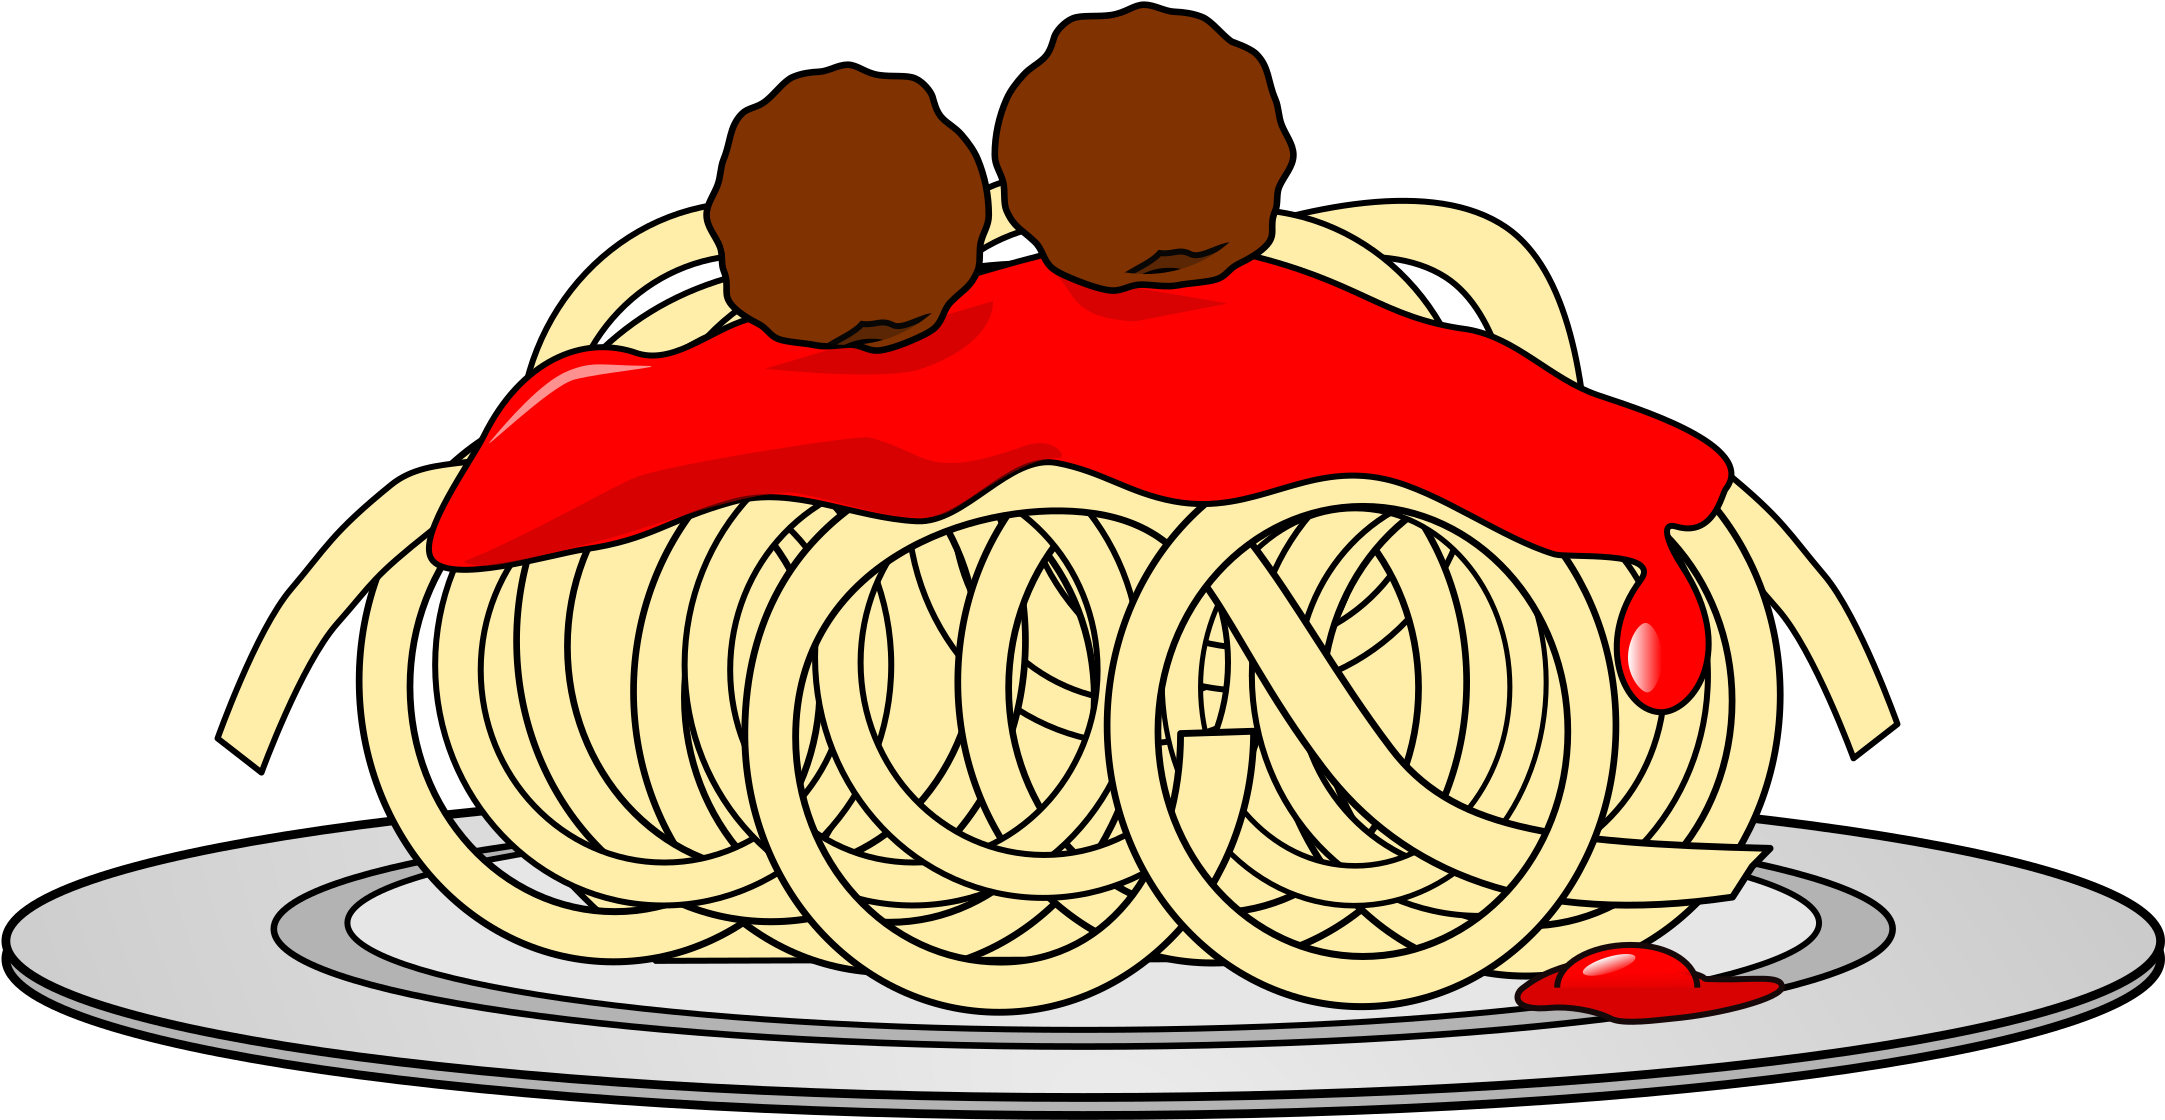 This Free Icons Png Design Of Spaghetti And Meatballs - Spaghetti And Meatballs Clipart (2400x1800)